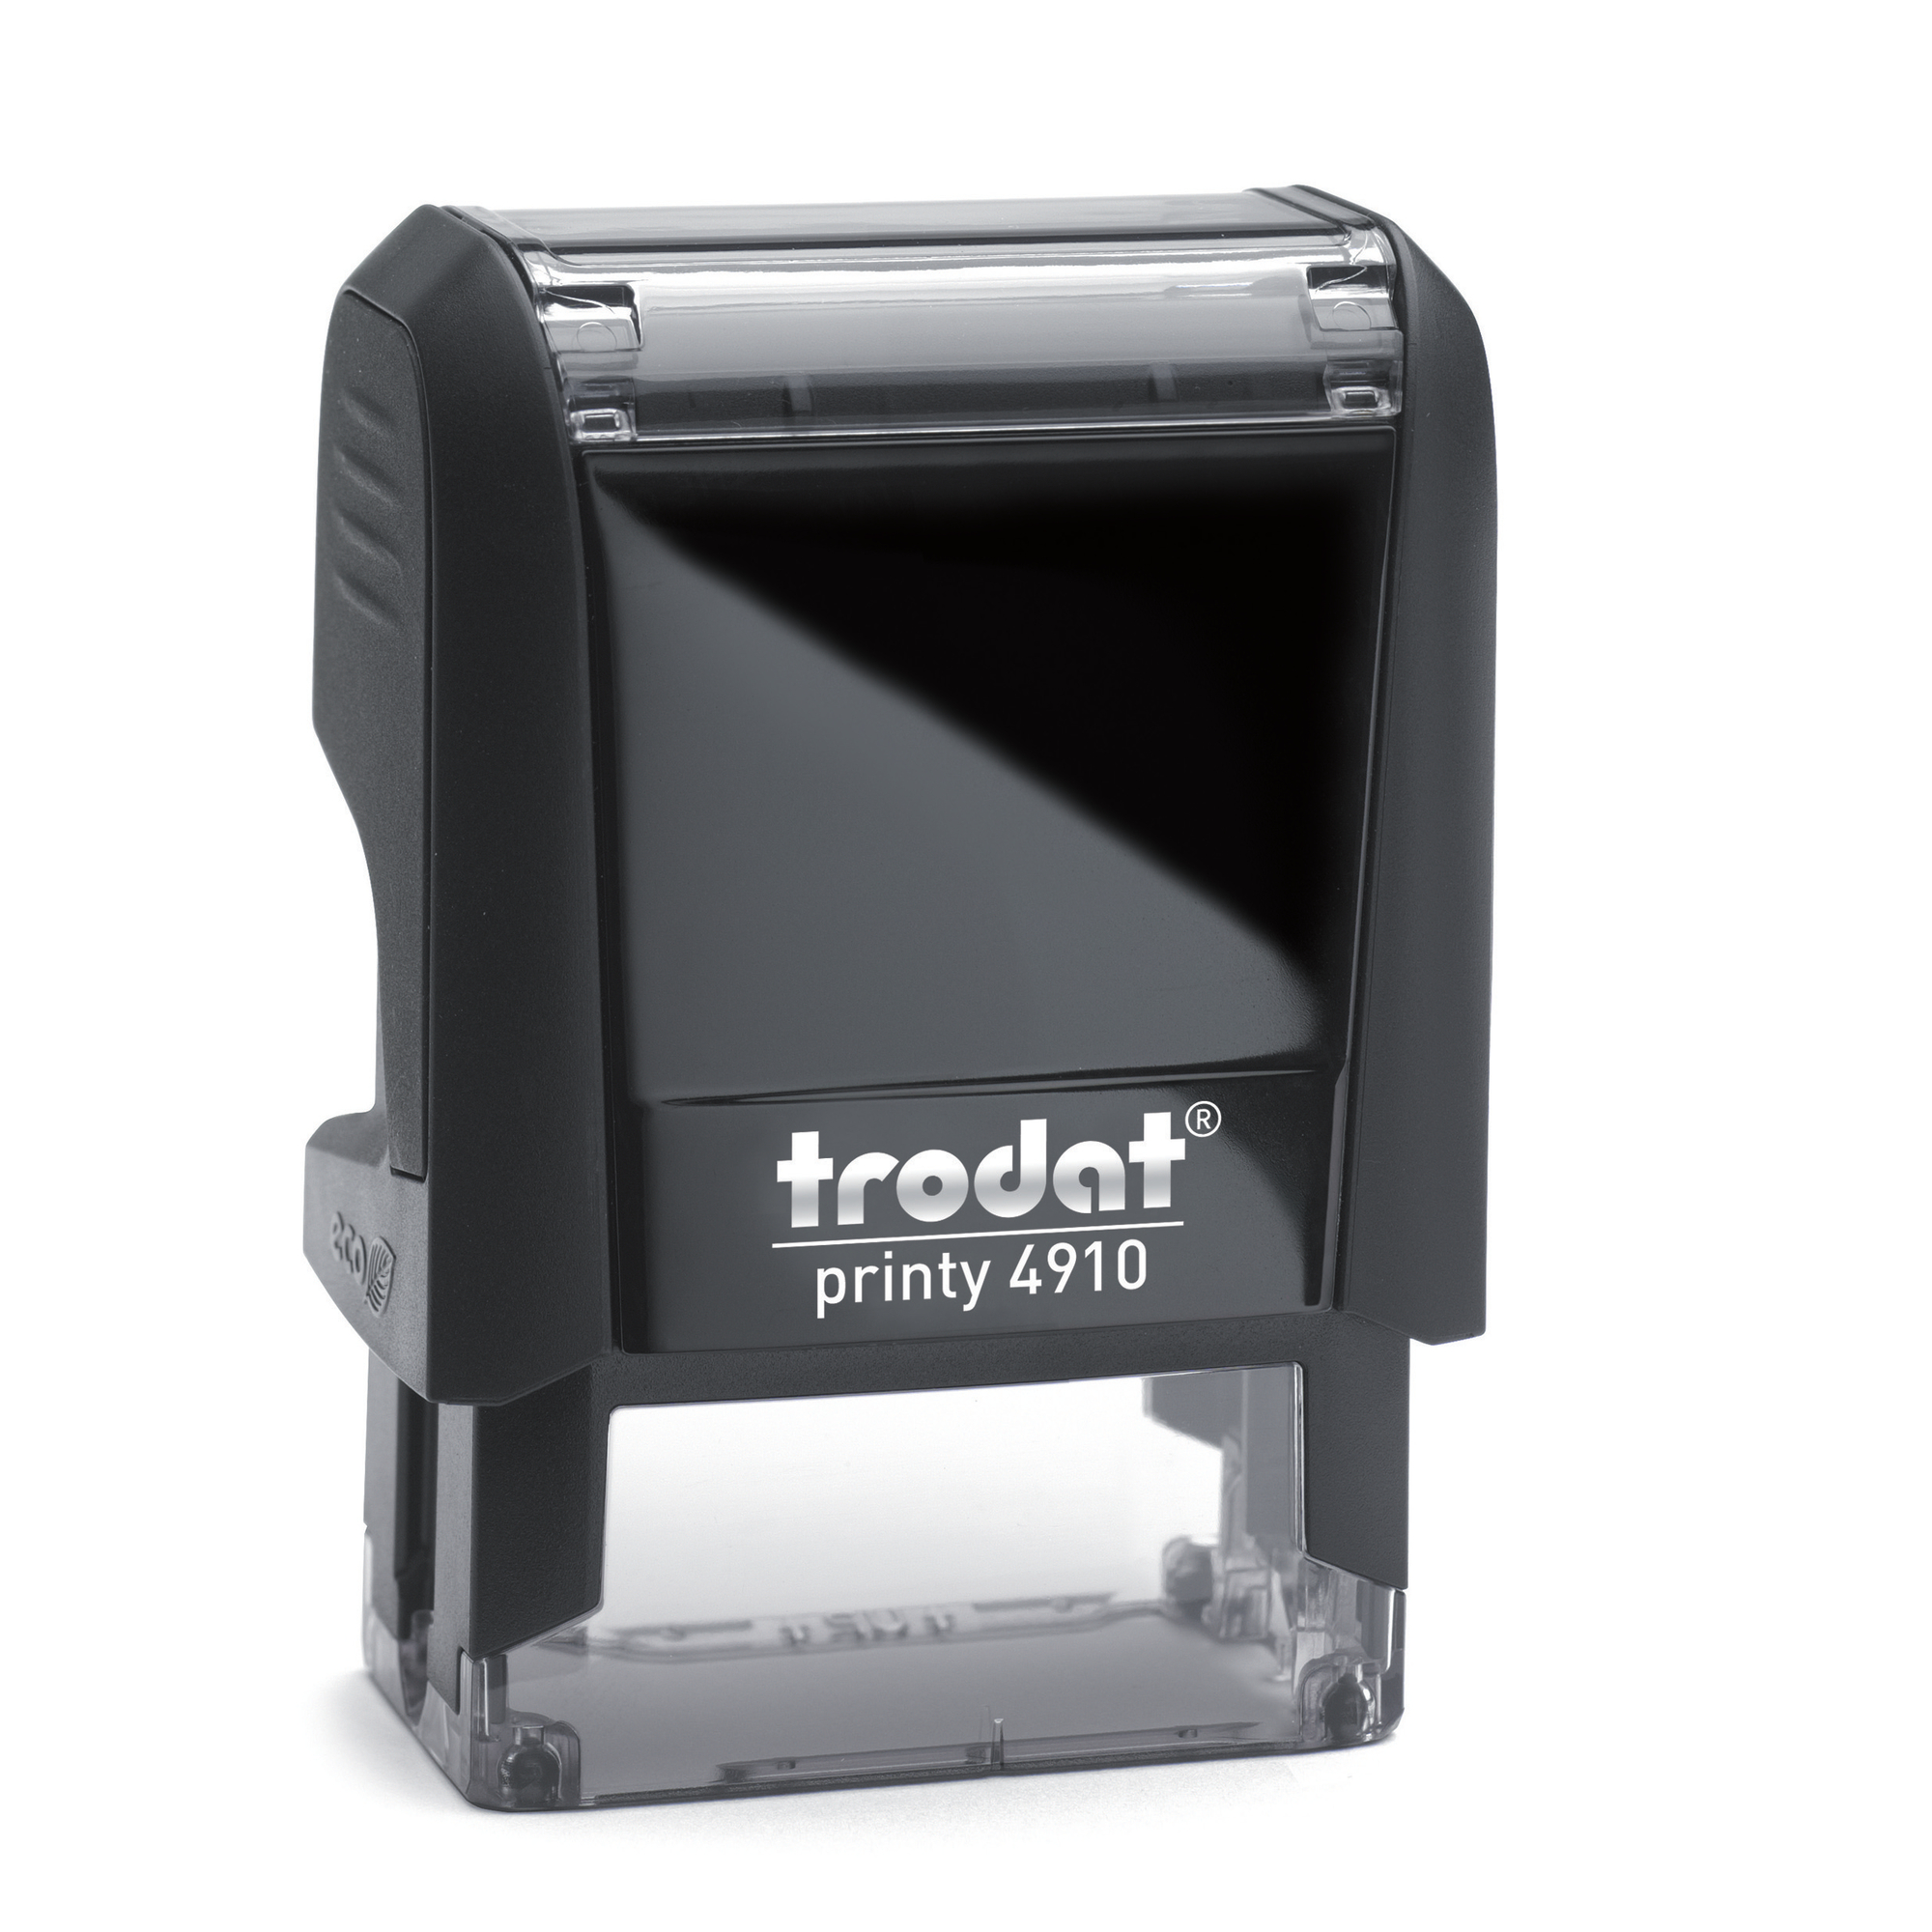 NEW Personalised Trodat Professional 5203 Self-inking stamp 848234029943 